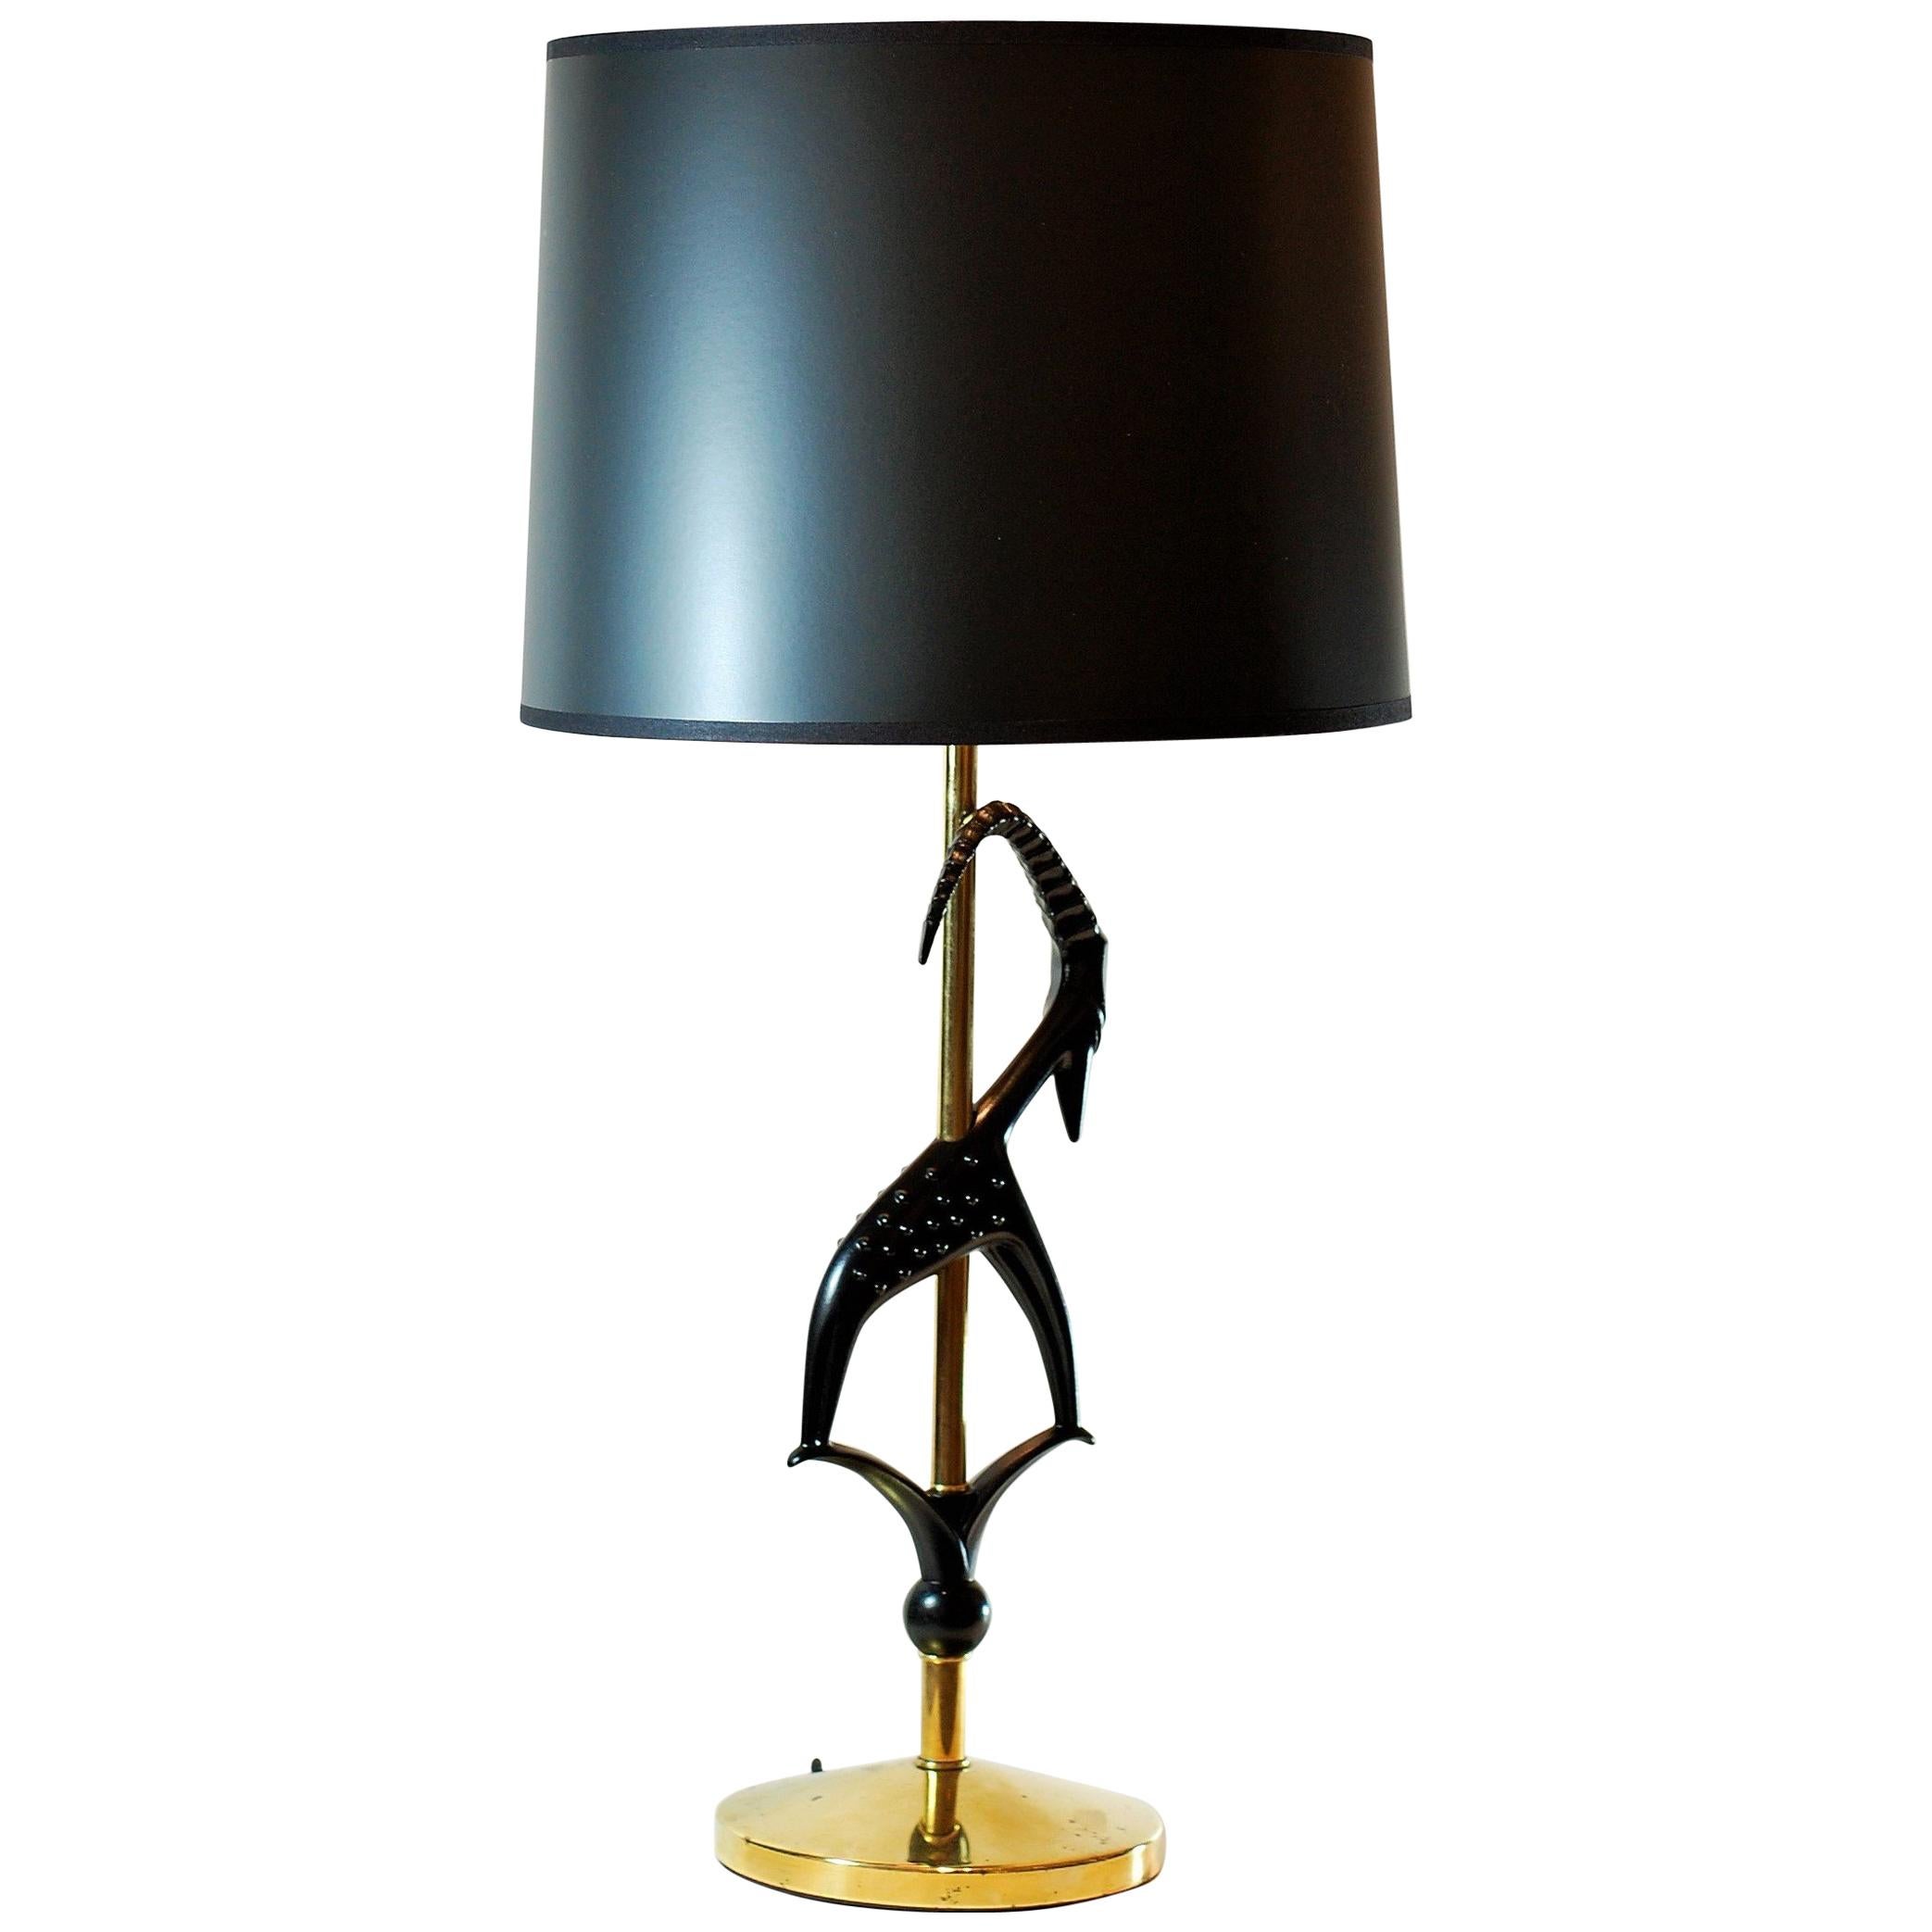 Gazelle by Rembrandt Lamp Company 1stDibs